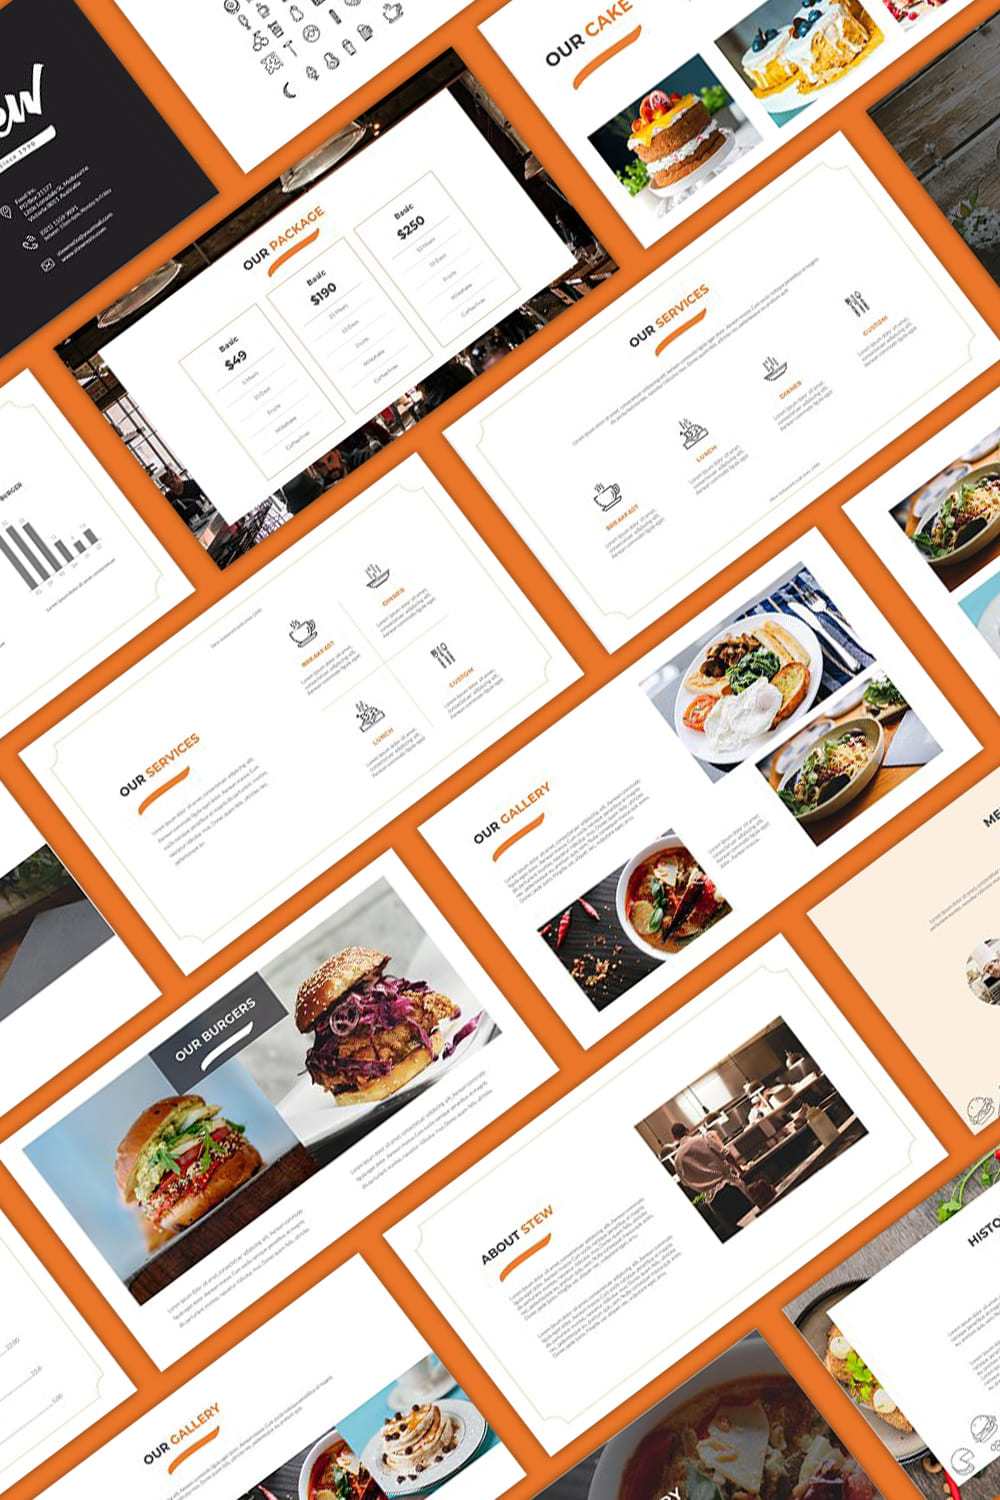 stew food powerpoint template 01 1000h1500